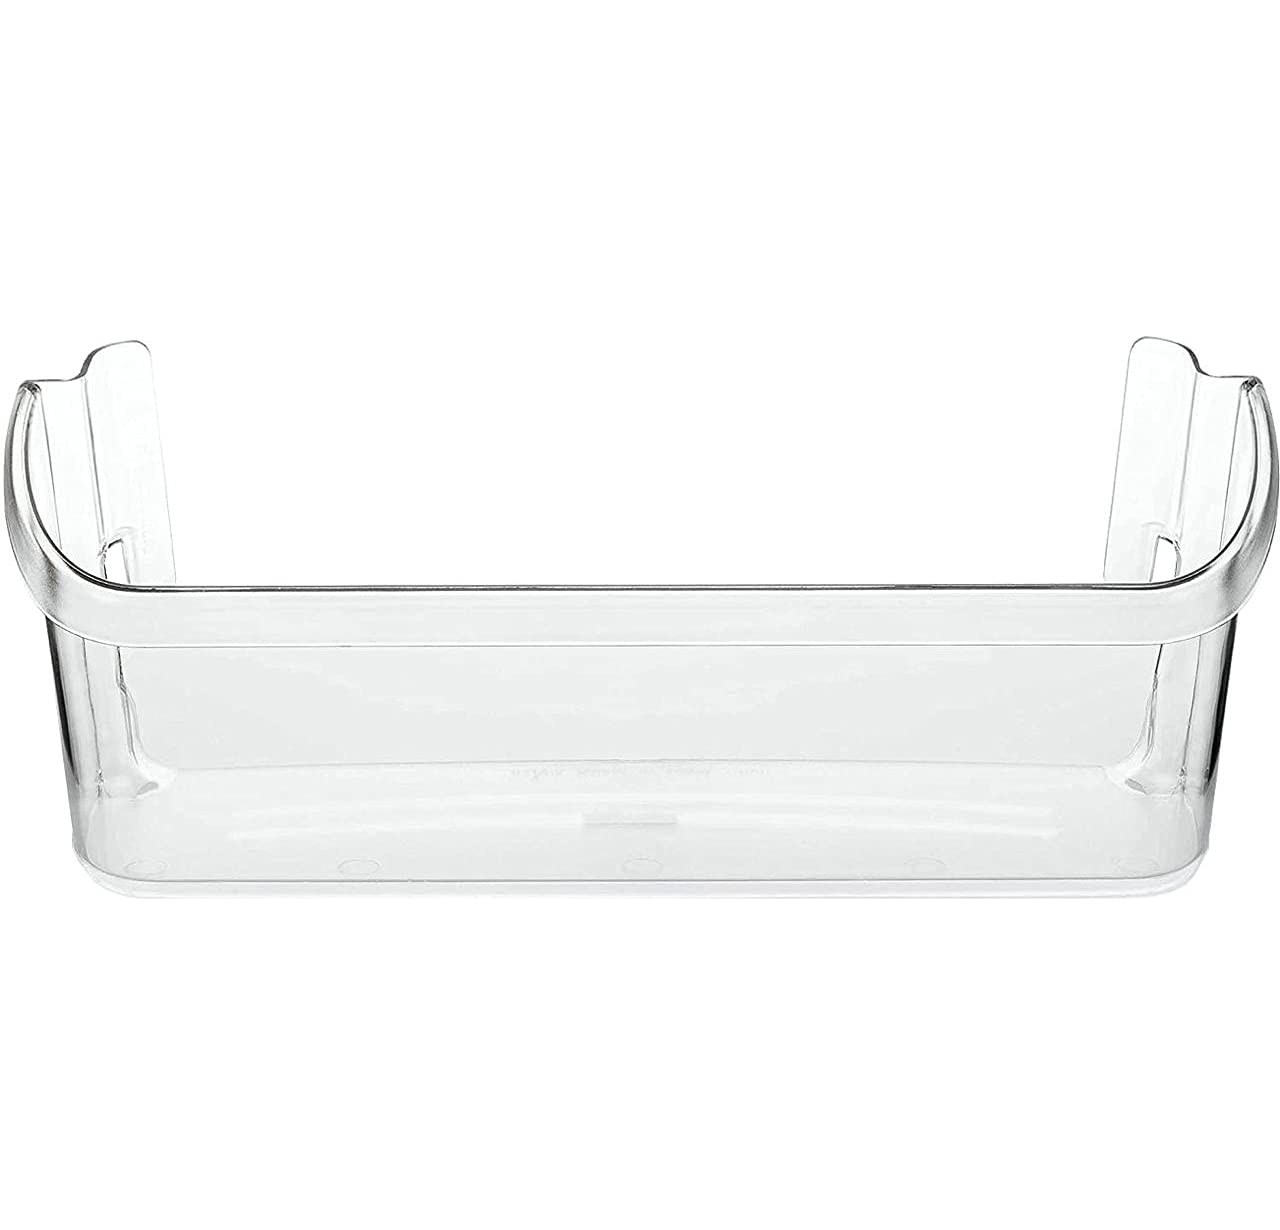 240323002 Frigidaire Refrigerator Door Bin Bottom Shelf Replacement Part FGHS2631PF3 FGHS2631PF4A FGHS2655PF5A FGUS2642LF2 FRS6LF7JM3 LGUS2642LF2 FGHS2631PF2 FGHS2655PF2 FGHS2655PF4 FGSS2635TF0